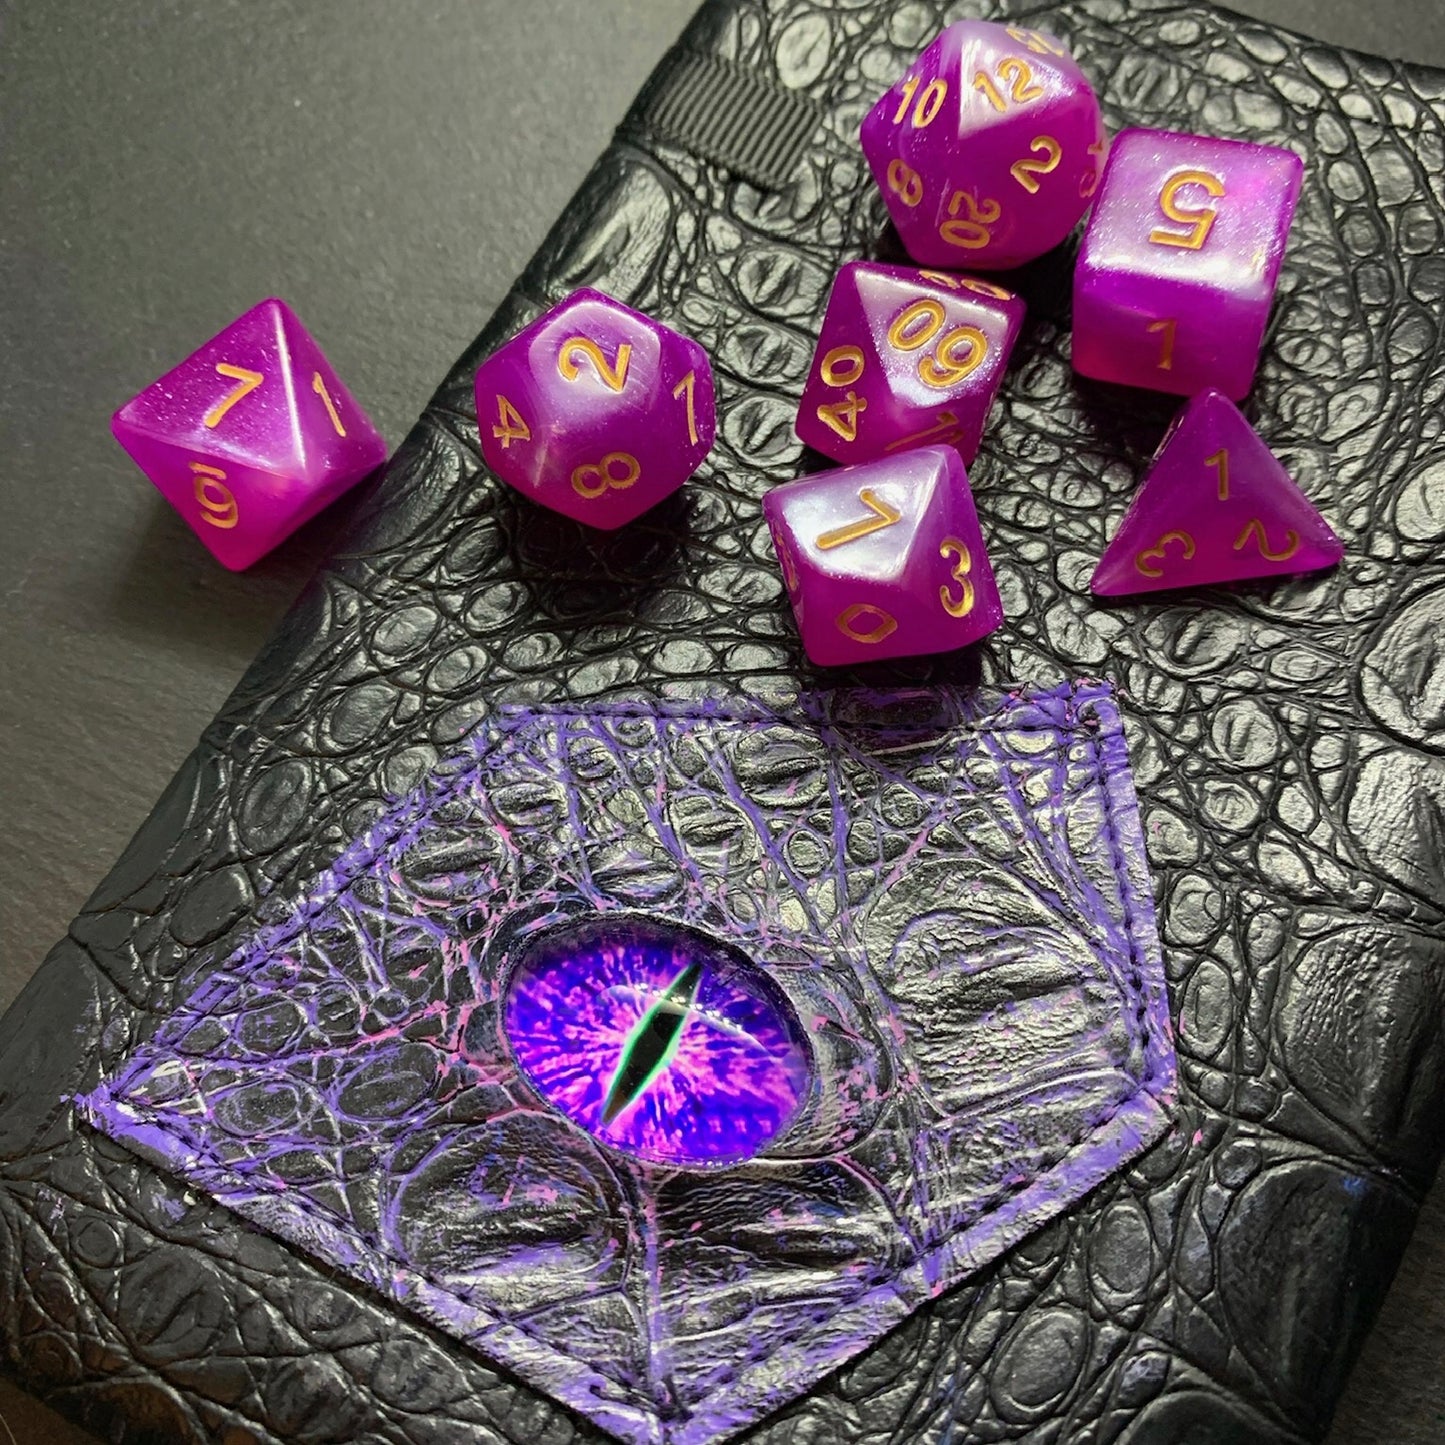 Eldritch Magenta Purple DnD 7 Dice Set And Hand Painted Dragon Eye Pouch Set In Vegan Leather - Darkmoon Fayre